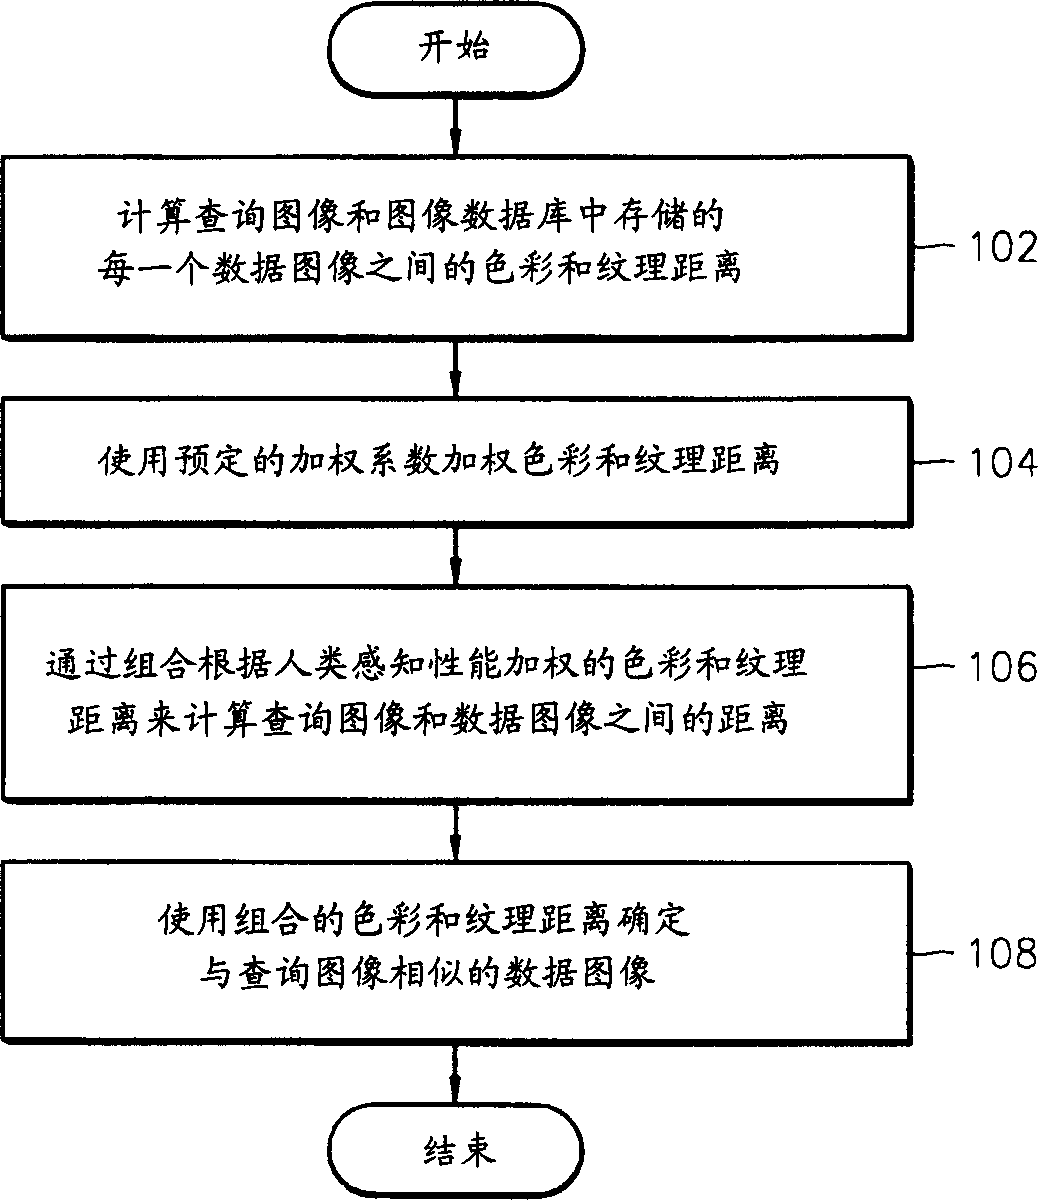 Image retrieval method based on color and image characteristic combination